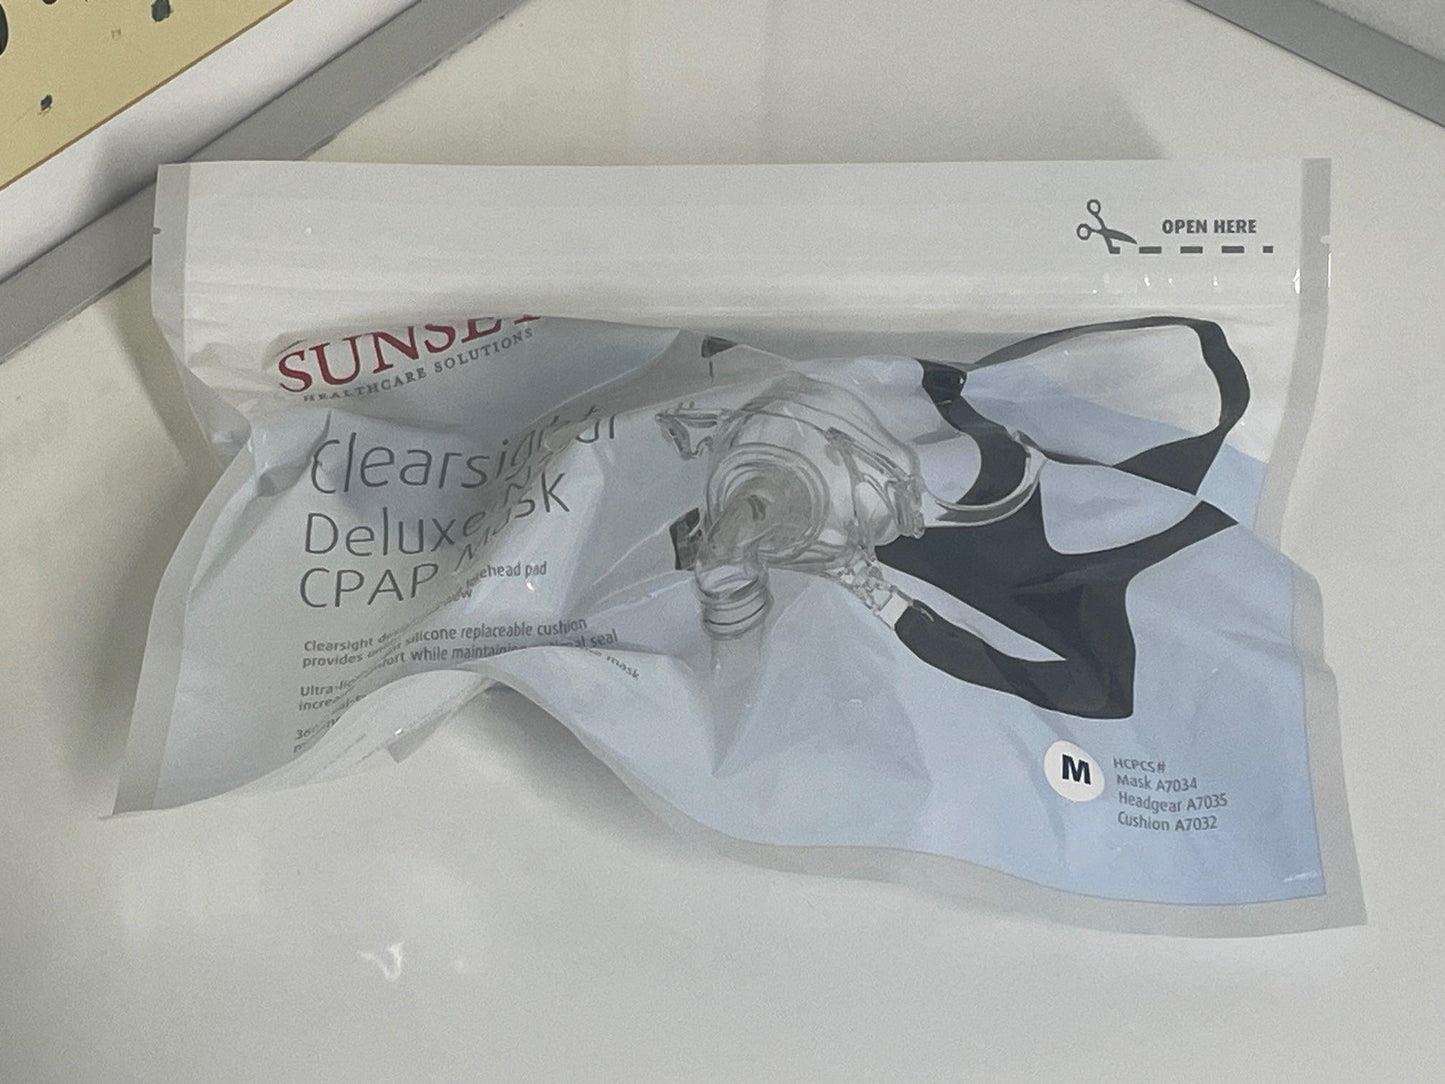 NEW Medium Sunset Healthcare Clearsight Deluxe Nasal CPAP Mask CM110M